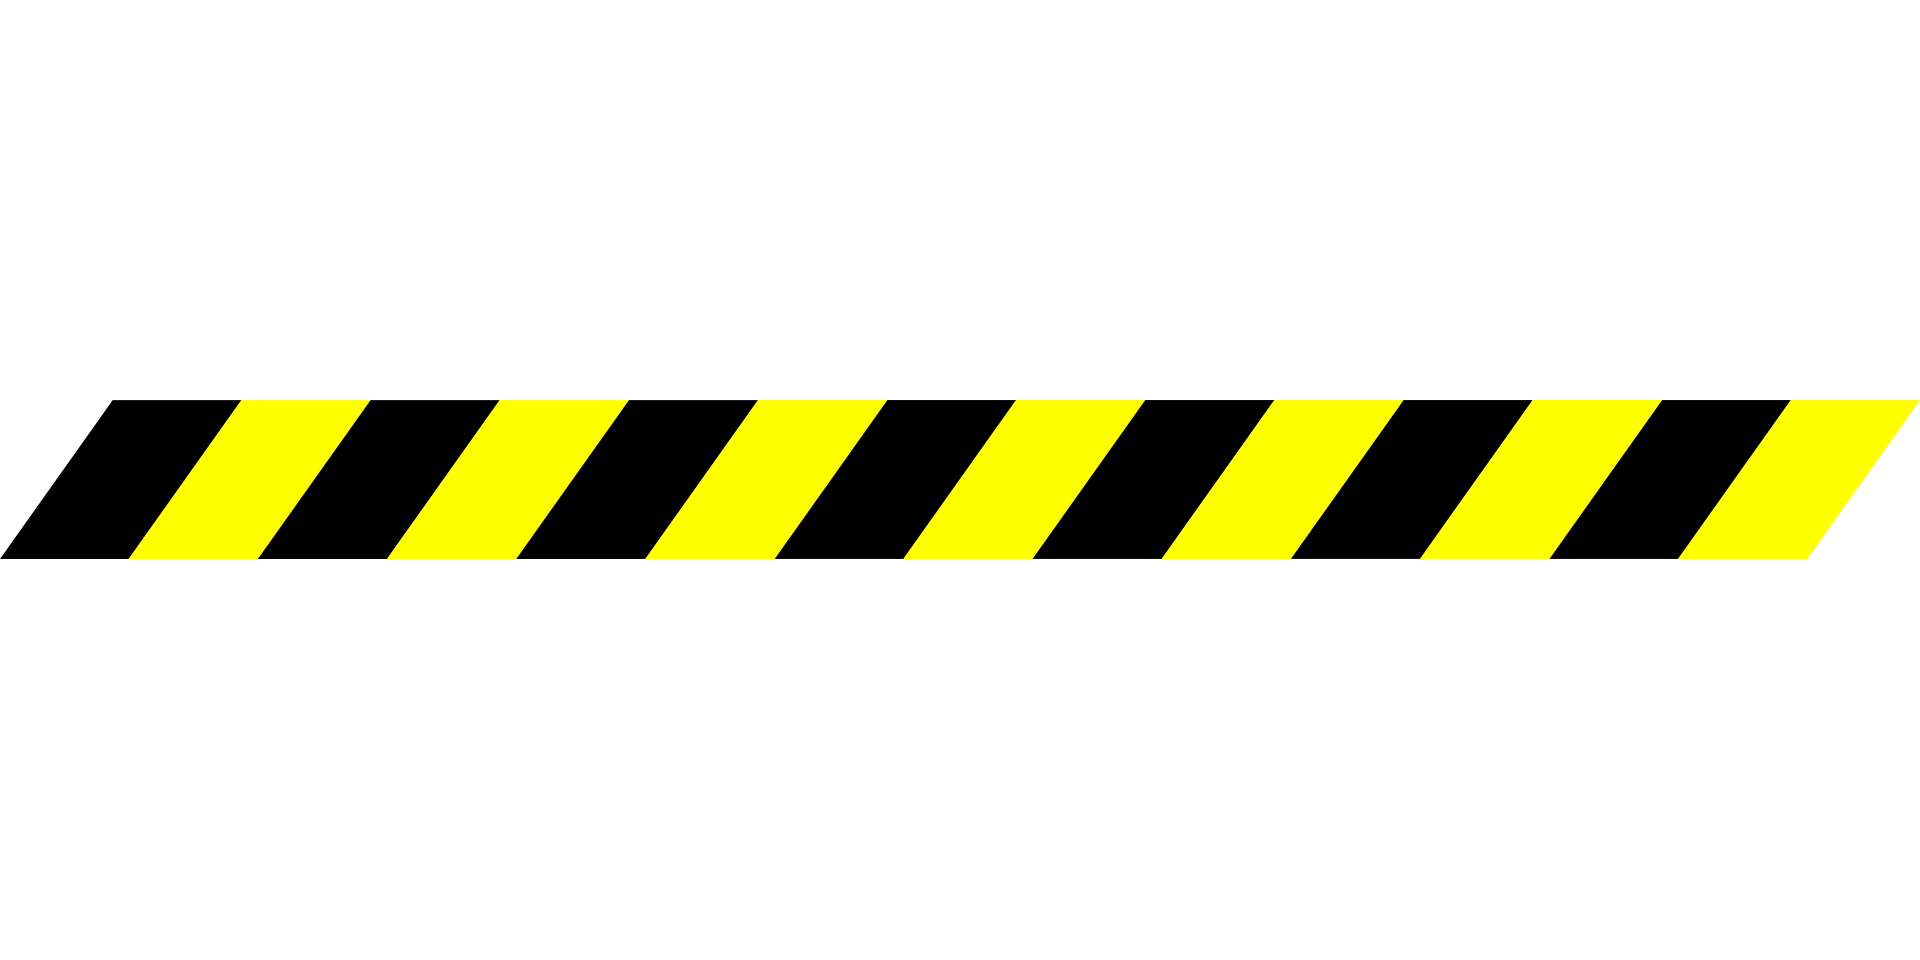 Barricade tape Clip art - police tape png download - 1920*960 - Free ...